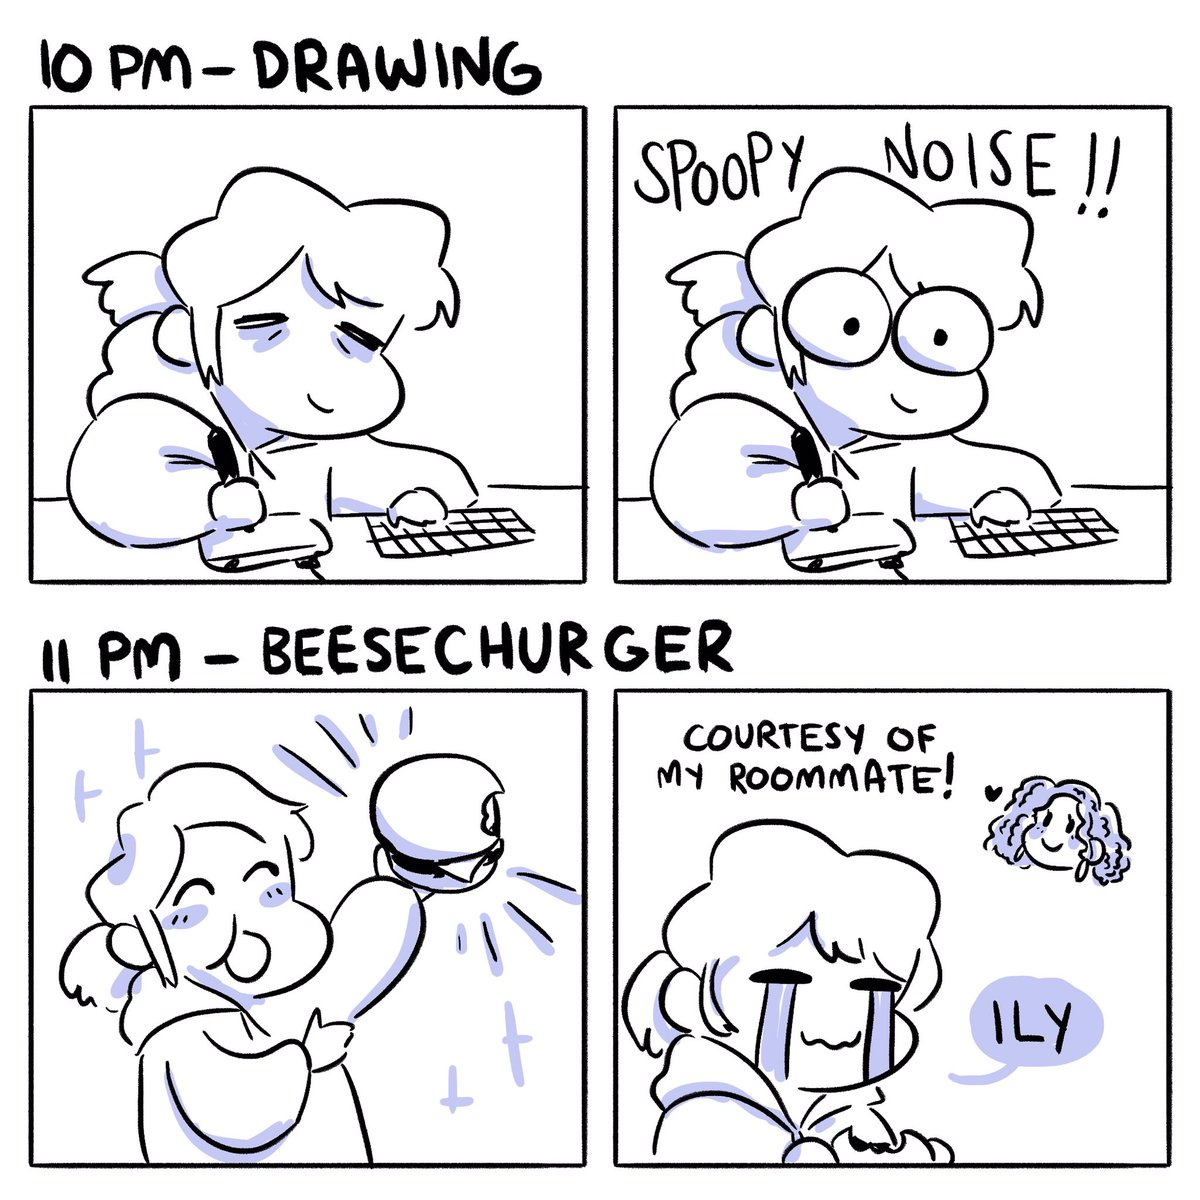 Happy Hourly Comic day! (2/2) #hourlycomicday2021 